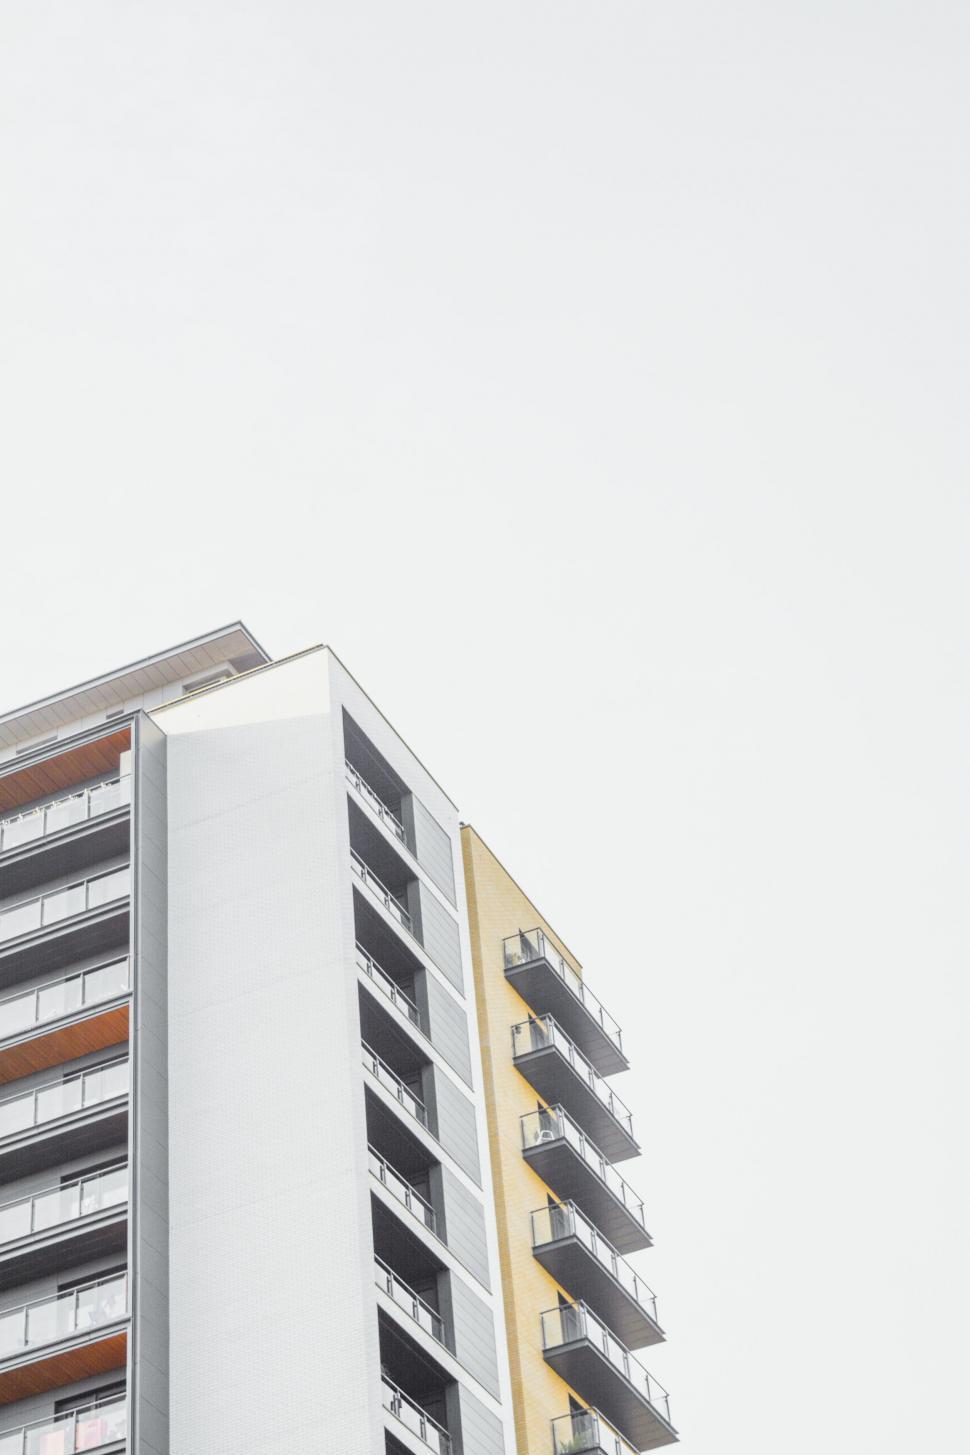 Free Image of Tall Building With Balconies 